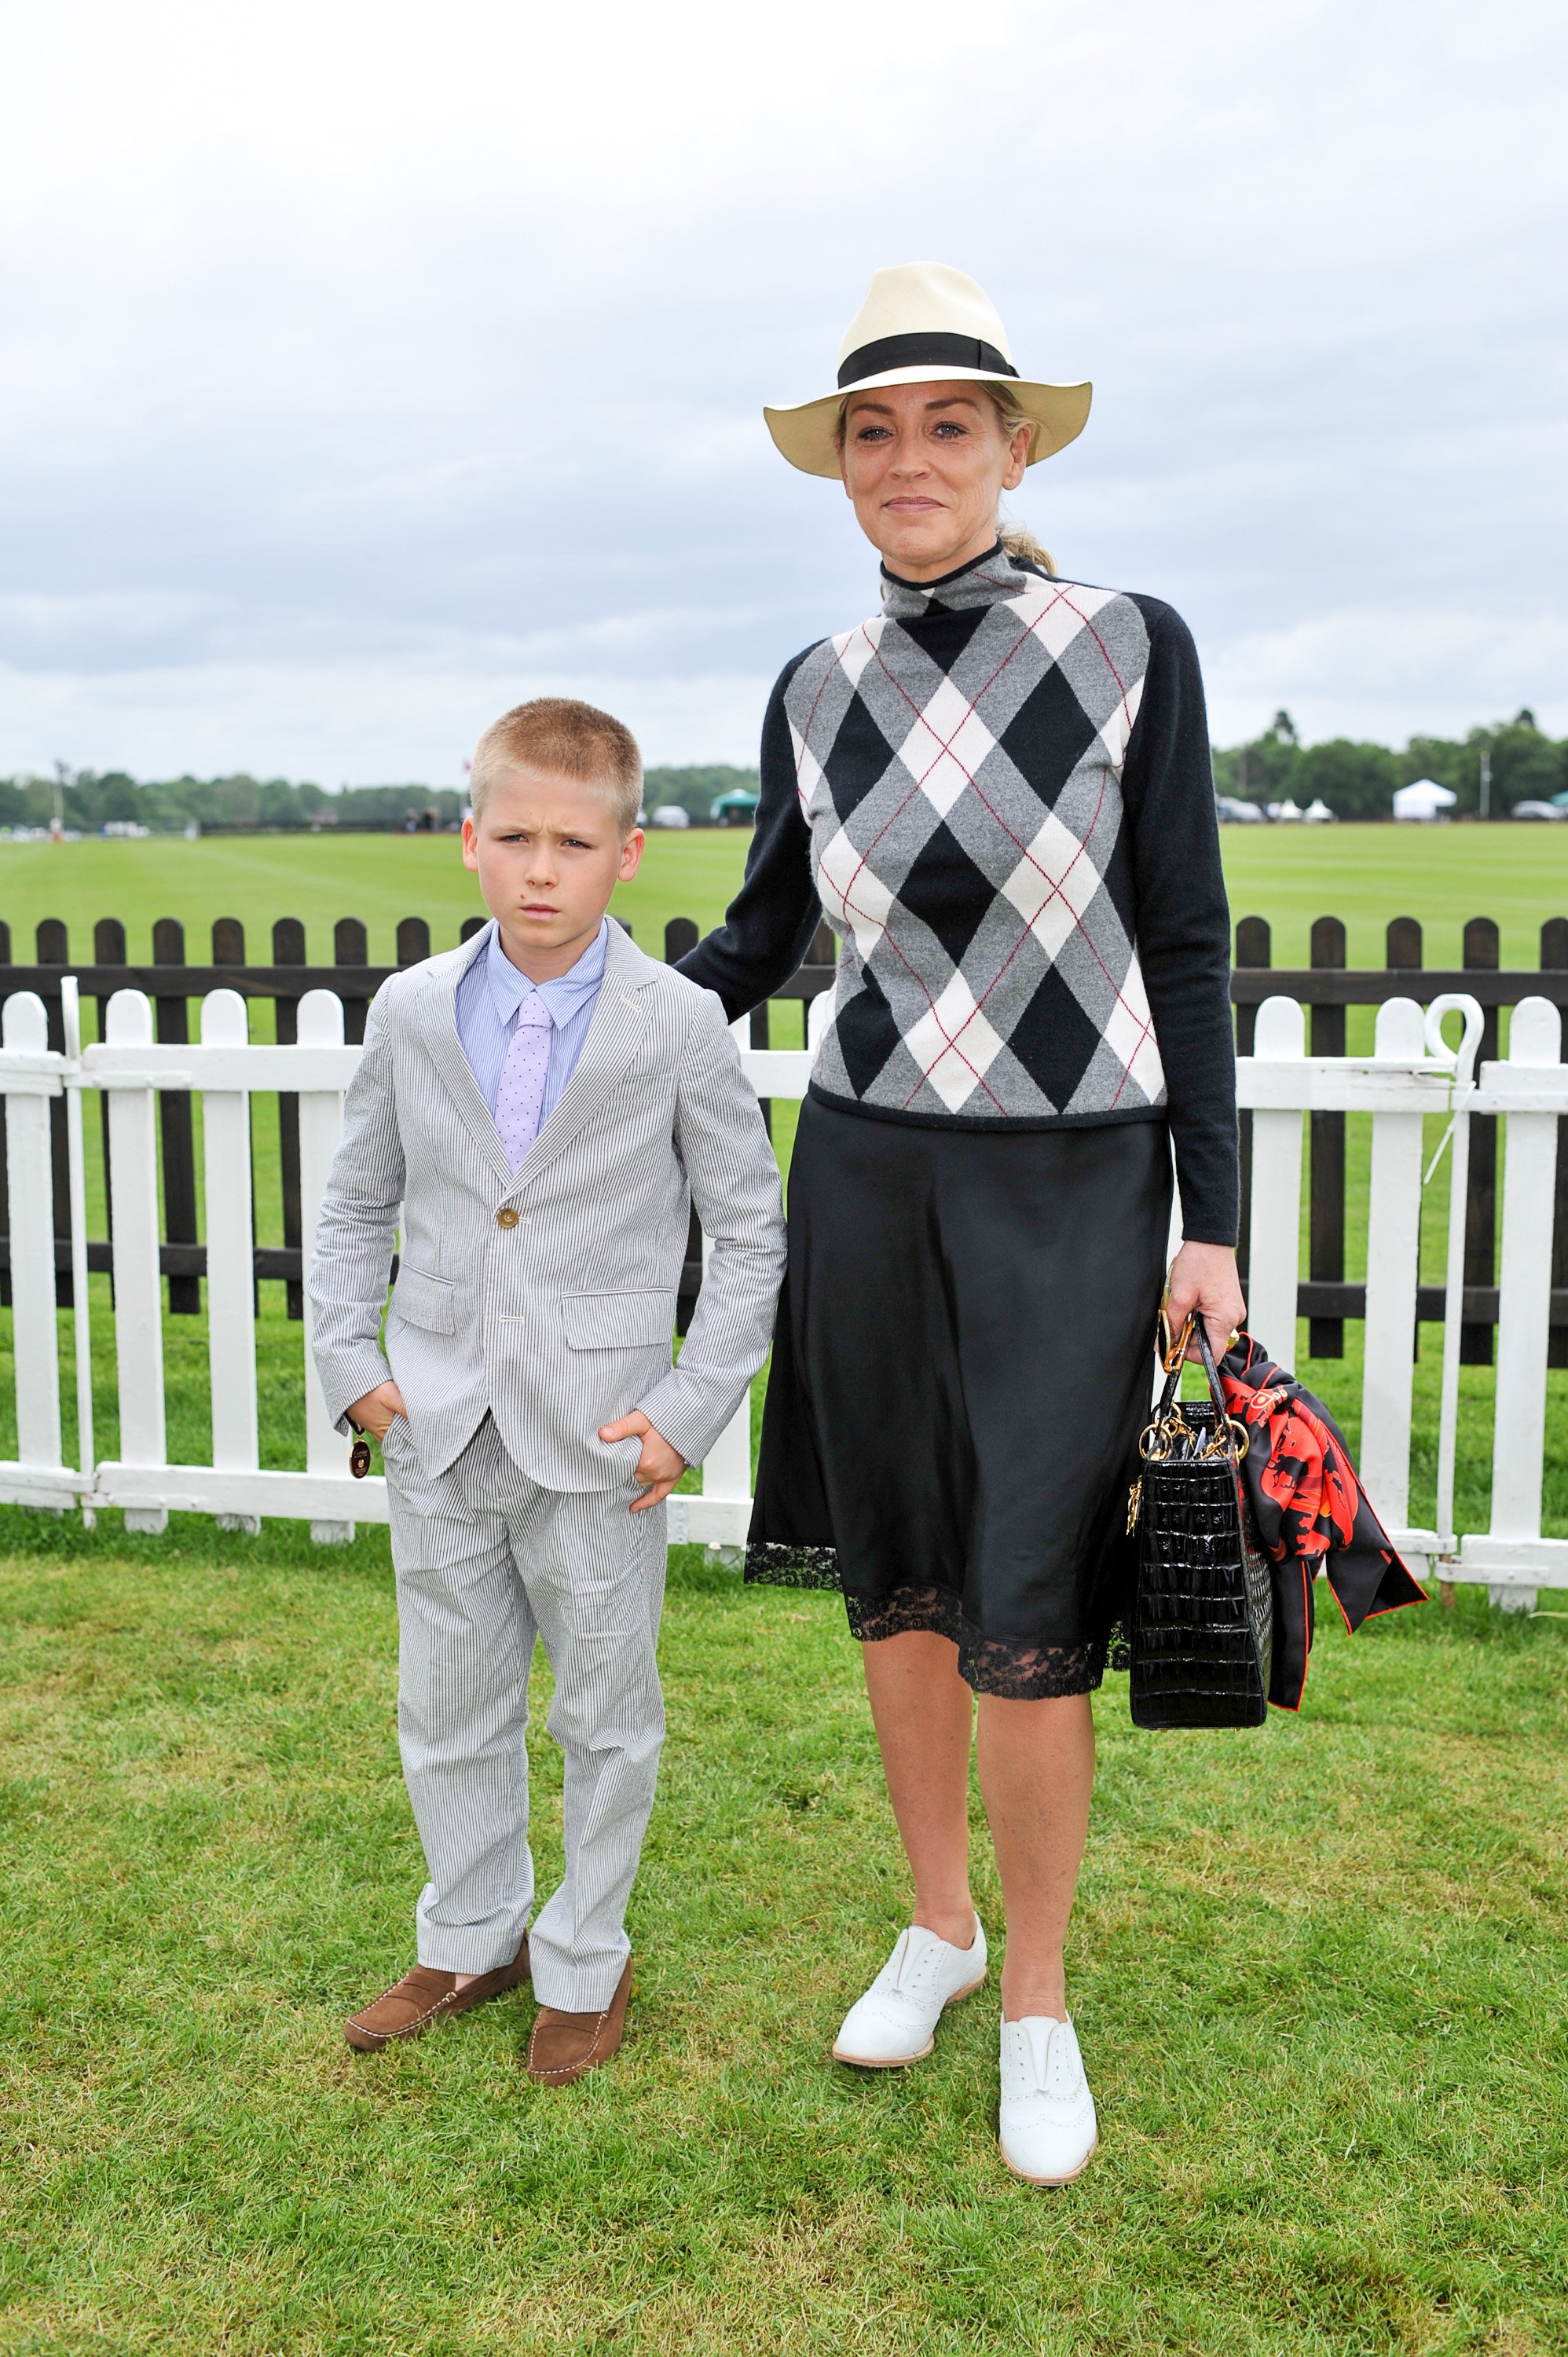 Roan Joseph Bronstein and Sharon Stone at the Cartier Queen's Cup final at Guards Polo Club on June 16, 2013 | Photo: Getty Images